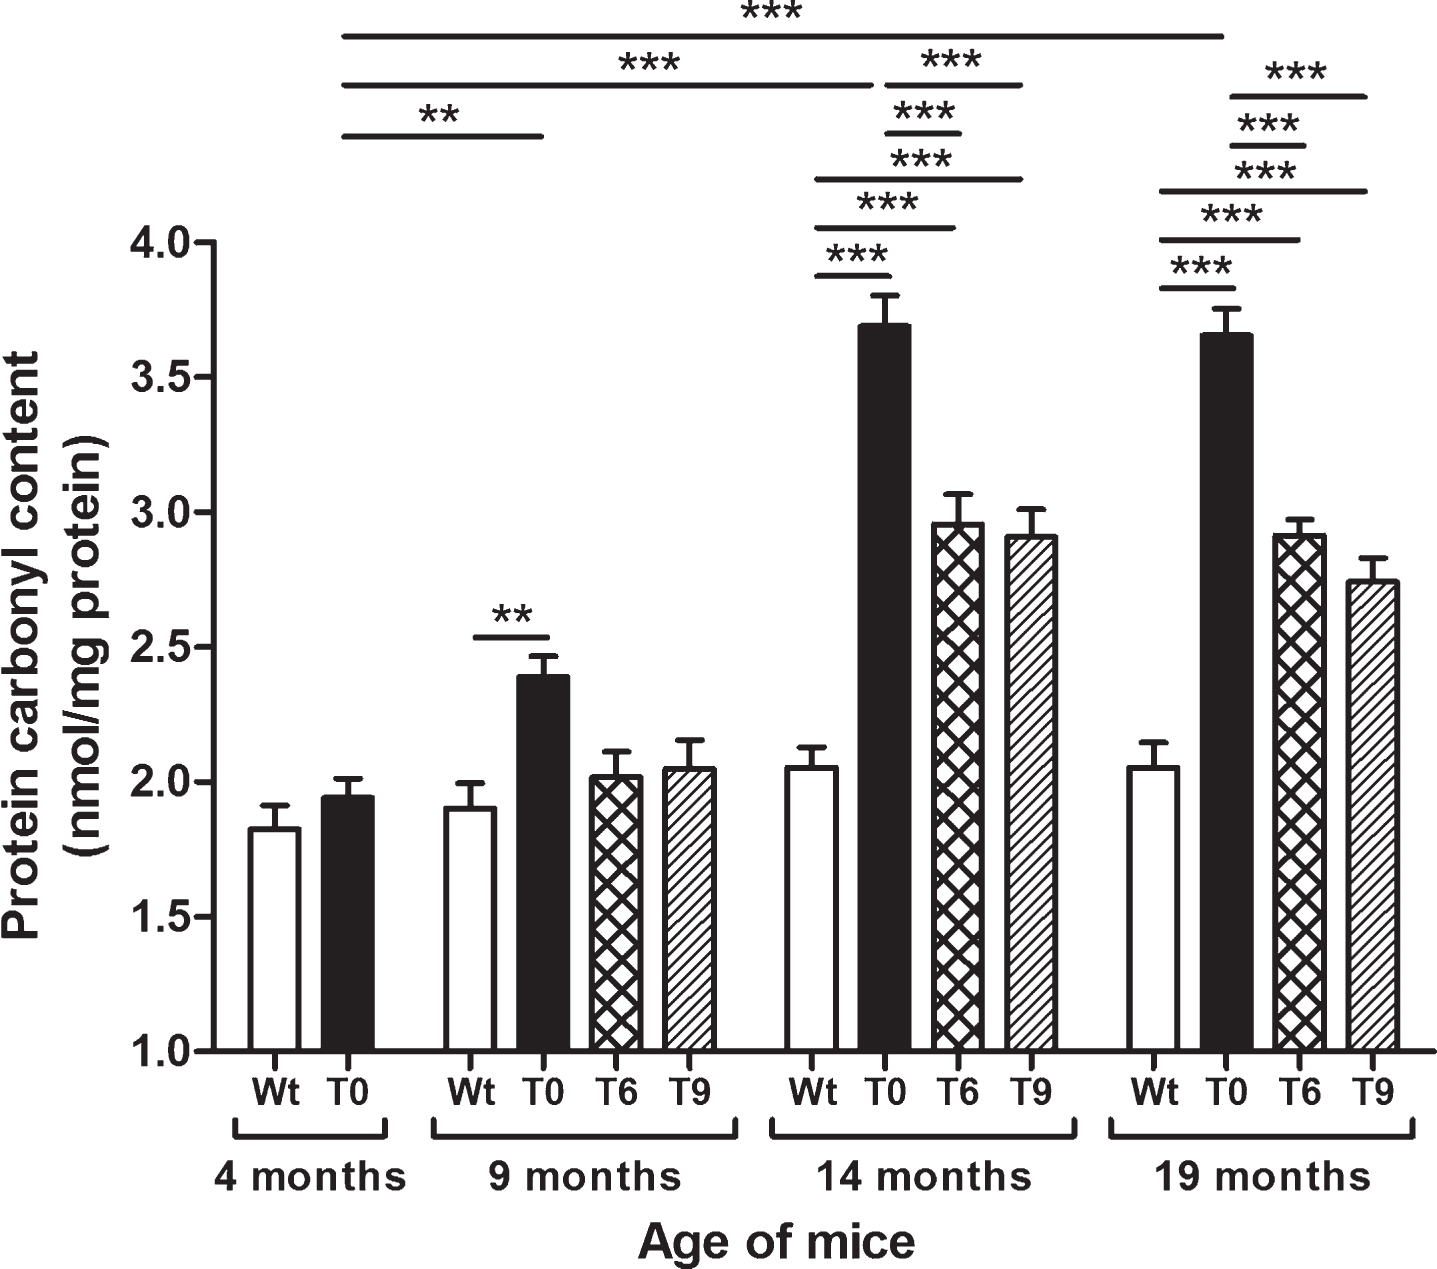 Effect of dietary walnut supplementation on protein oxidation in AD-tg mice. Protein oxidation was assessed as protein carbonyl content in the liver tissues. Diet with walnuts was fed to AD-tg mice from the age of 4 months for a period of 5, 10, or 15 months, i.e., until the age of 9, 14, or 19 months. Data are represented as the mean±SEM. Wild-type mice on control diet (Wt), AD-tg on control diet (T0), and AD-tg mice on diet containing 6% walnuts (T6) and 9% walnuts (T9). *p < 0.05, **p < 0.01, and ***p < 0.001.